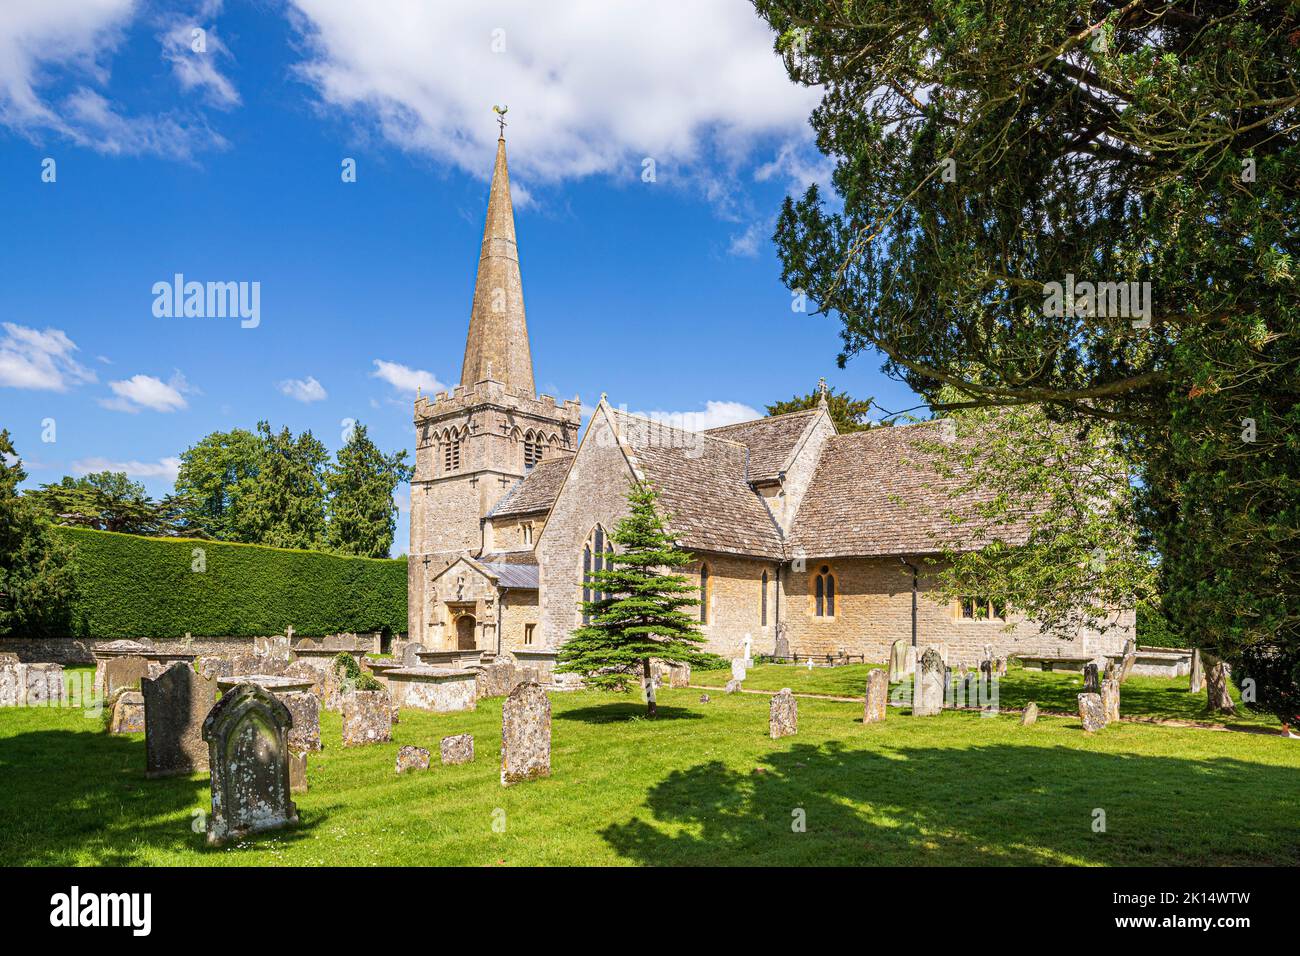 All Saints church in the Cotswold village of Down Ampney, Gloucestershire UK. Ralph Vaughan Williams was born in the Old Vicarage in 1872. Stock Photo